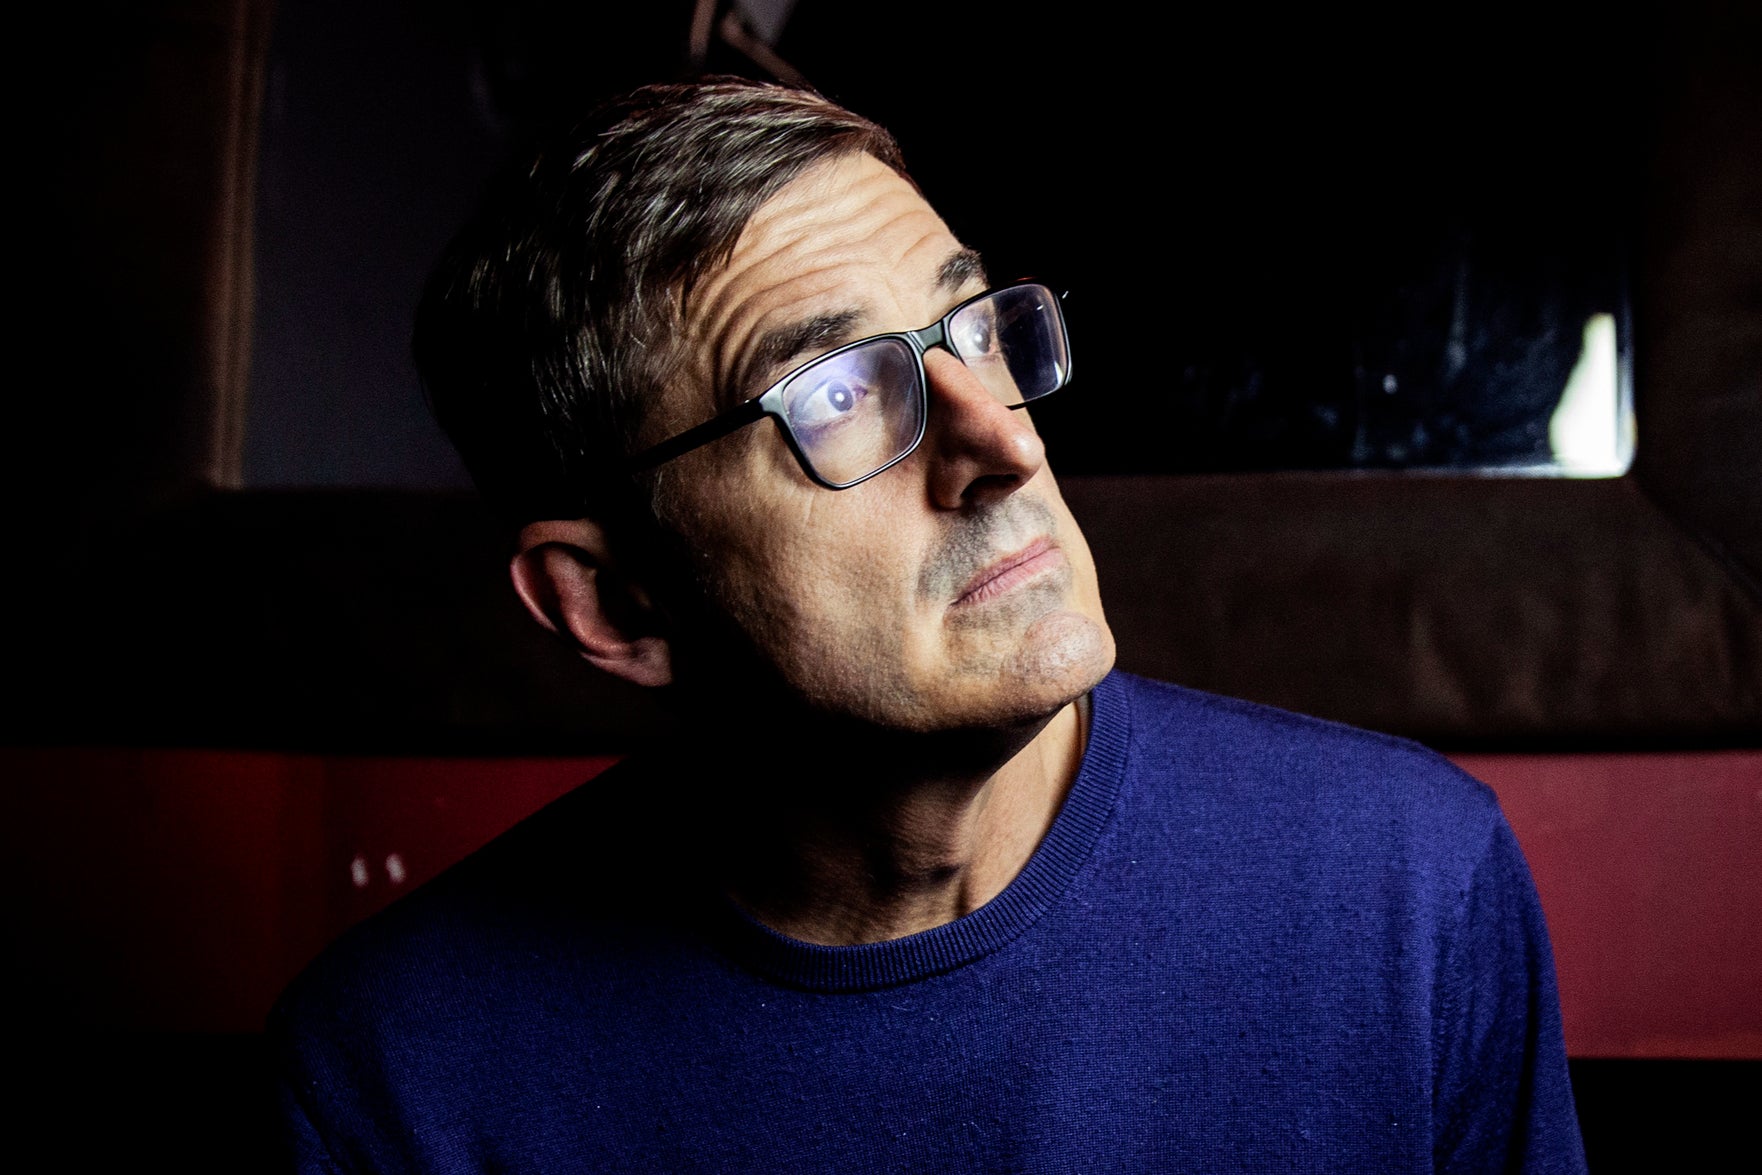 Louis Theroux, the patron saint of discomfort who thinks TV has become a bit too comfortable